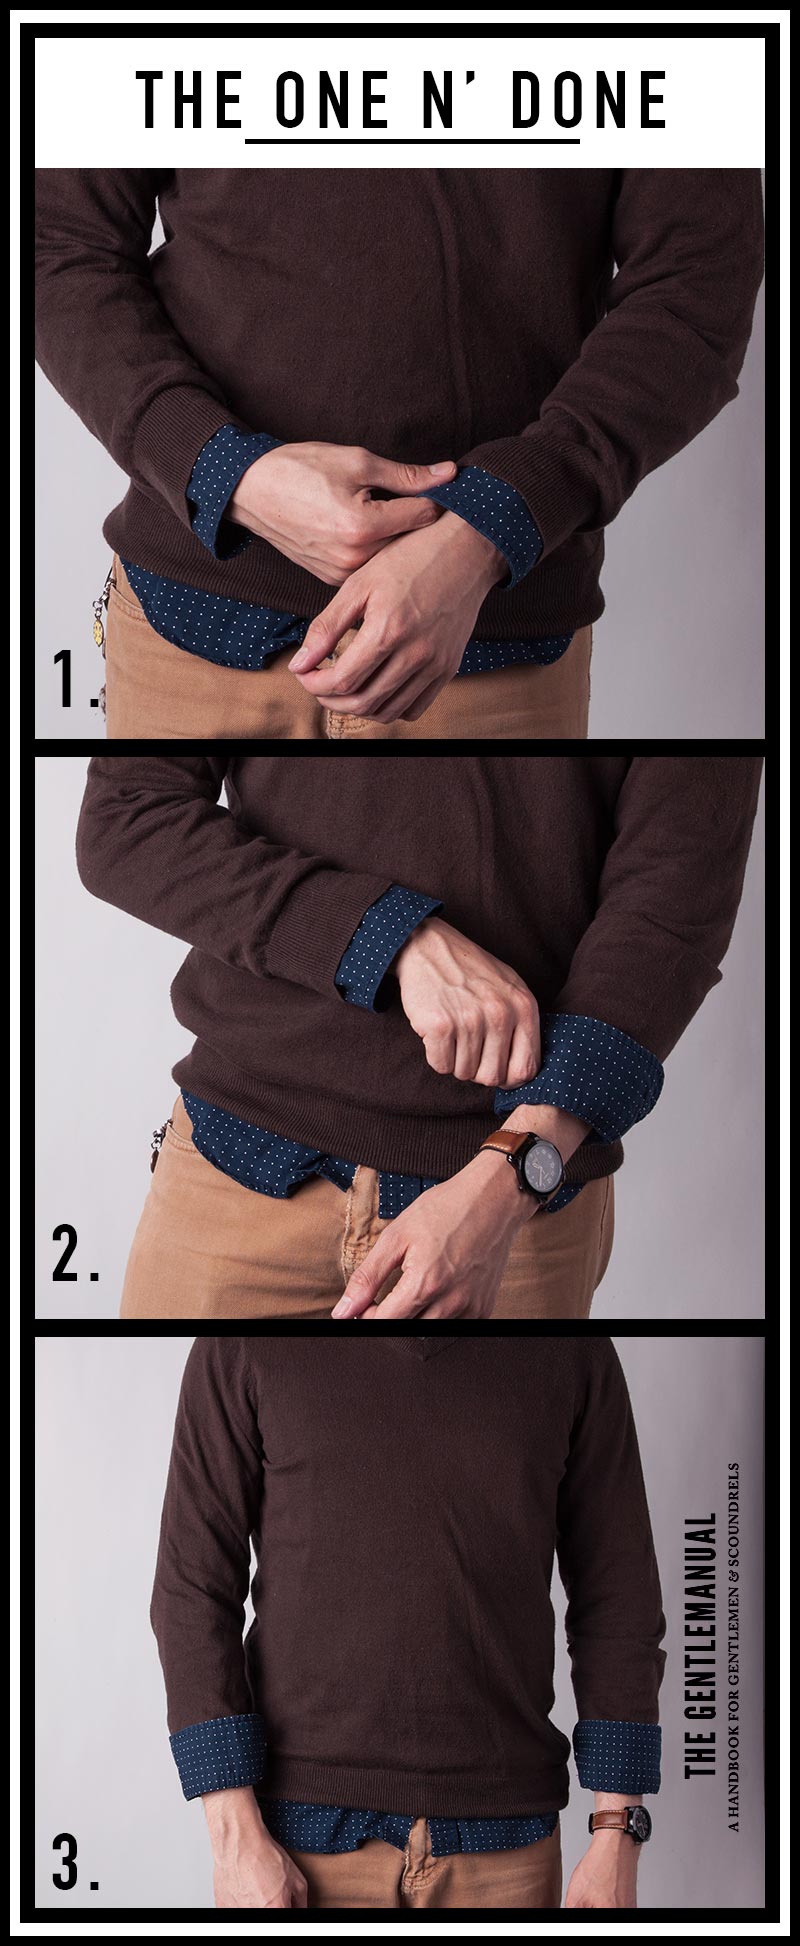 The One-N-Done sleeve shirt rolling method